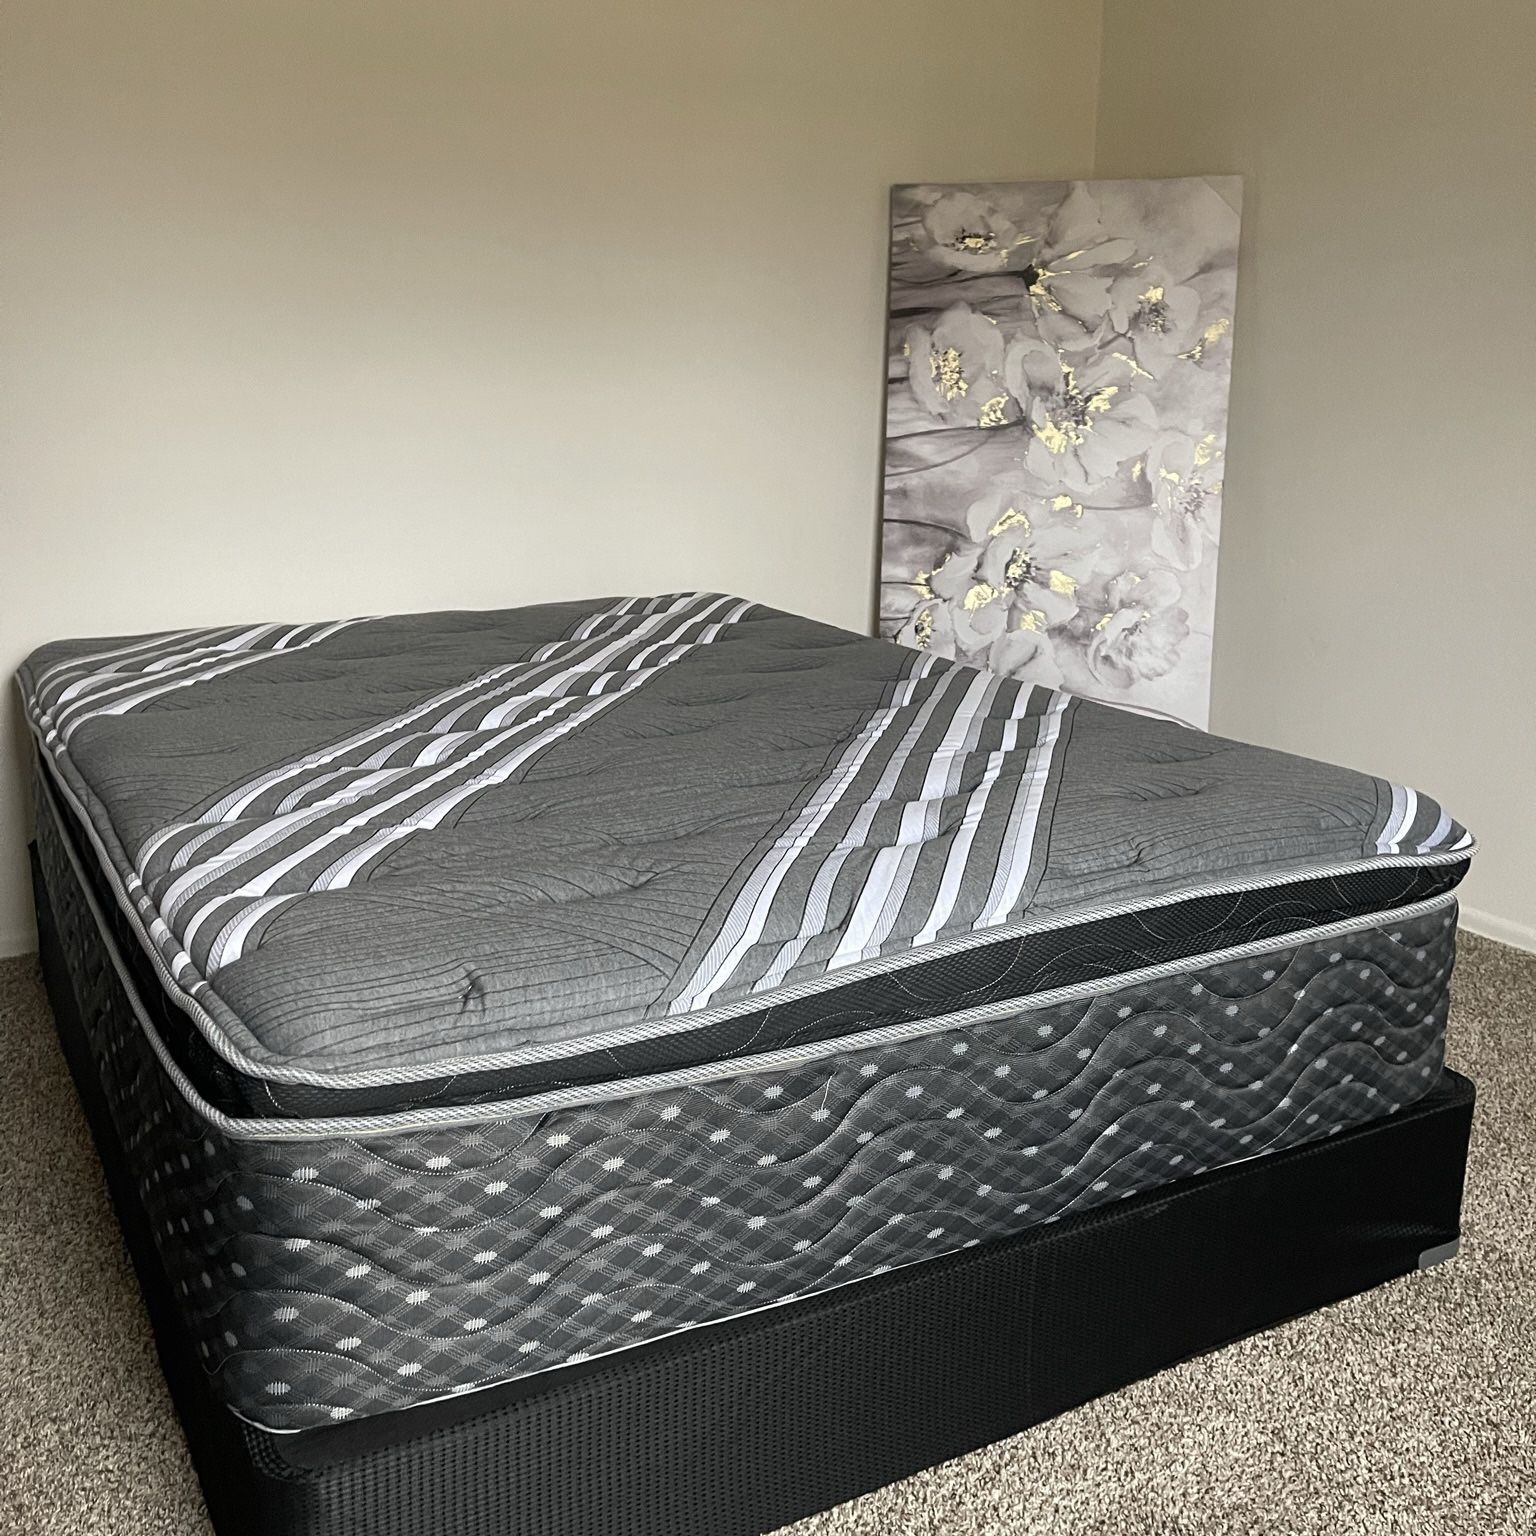 Getting rid of new mattresses - King, Queen, Full, Twin available 